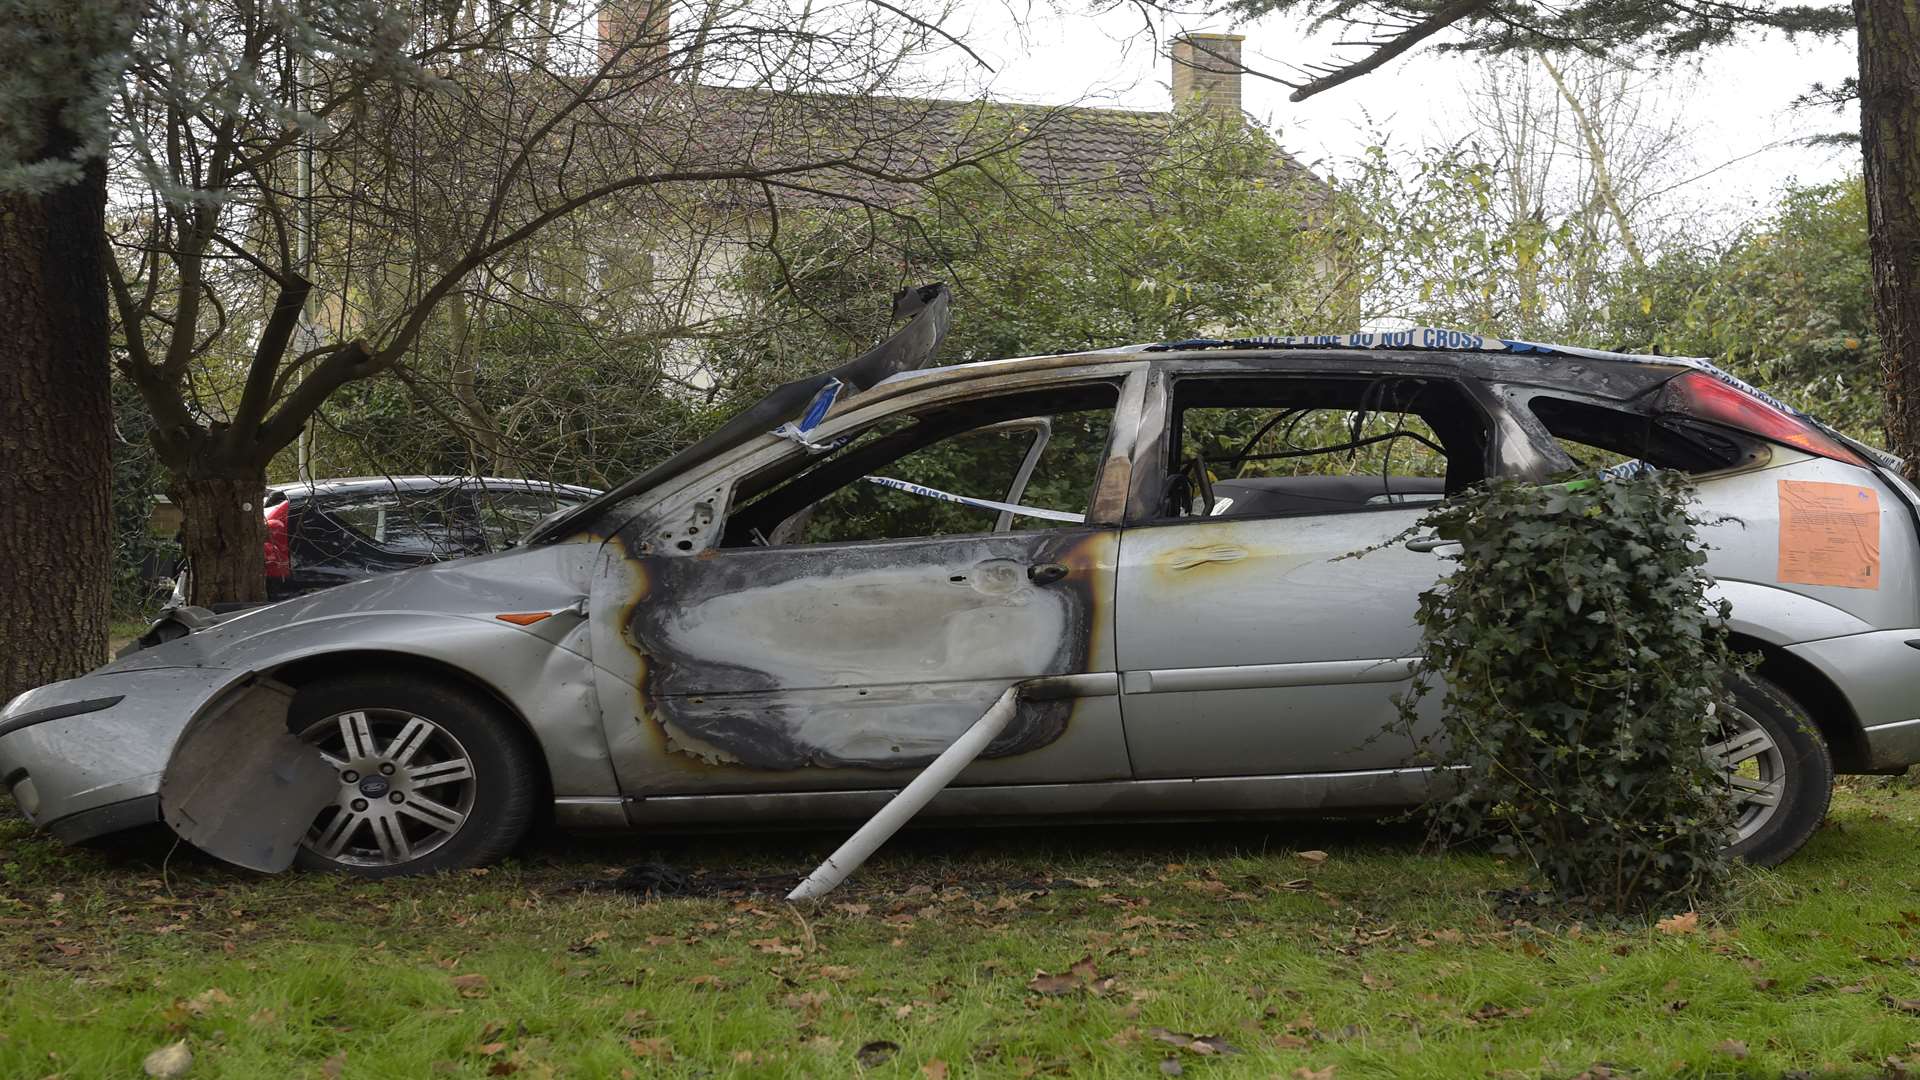 The burned out car had still not been removed on Tuesday afternoon